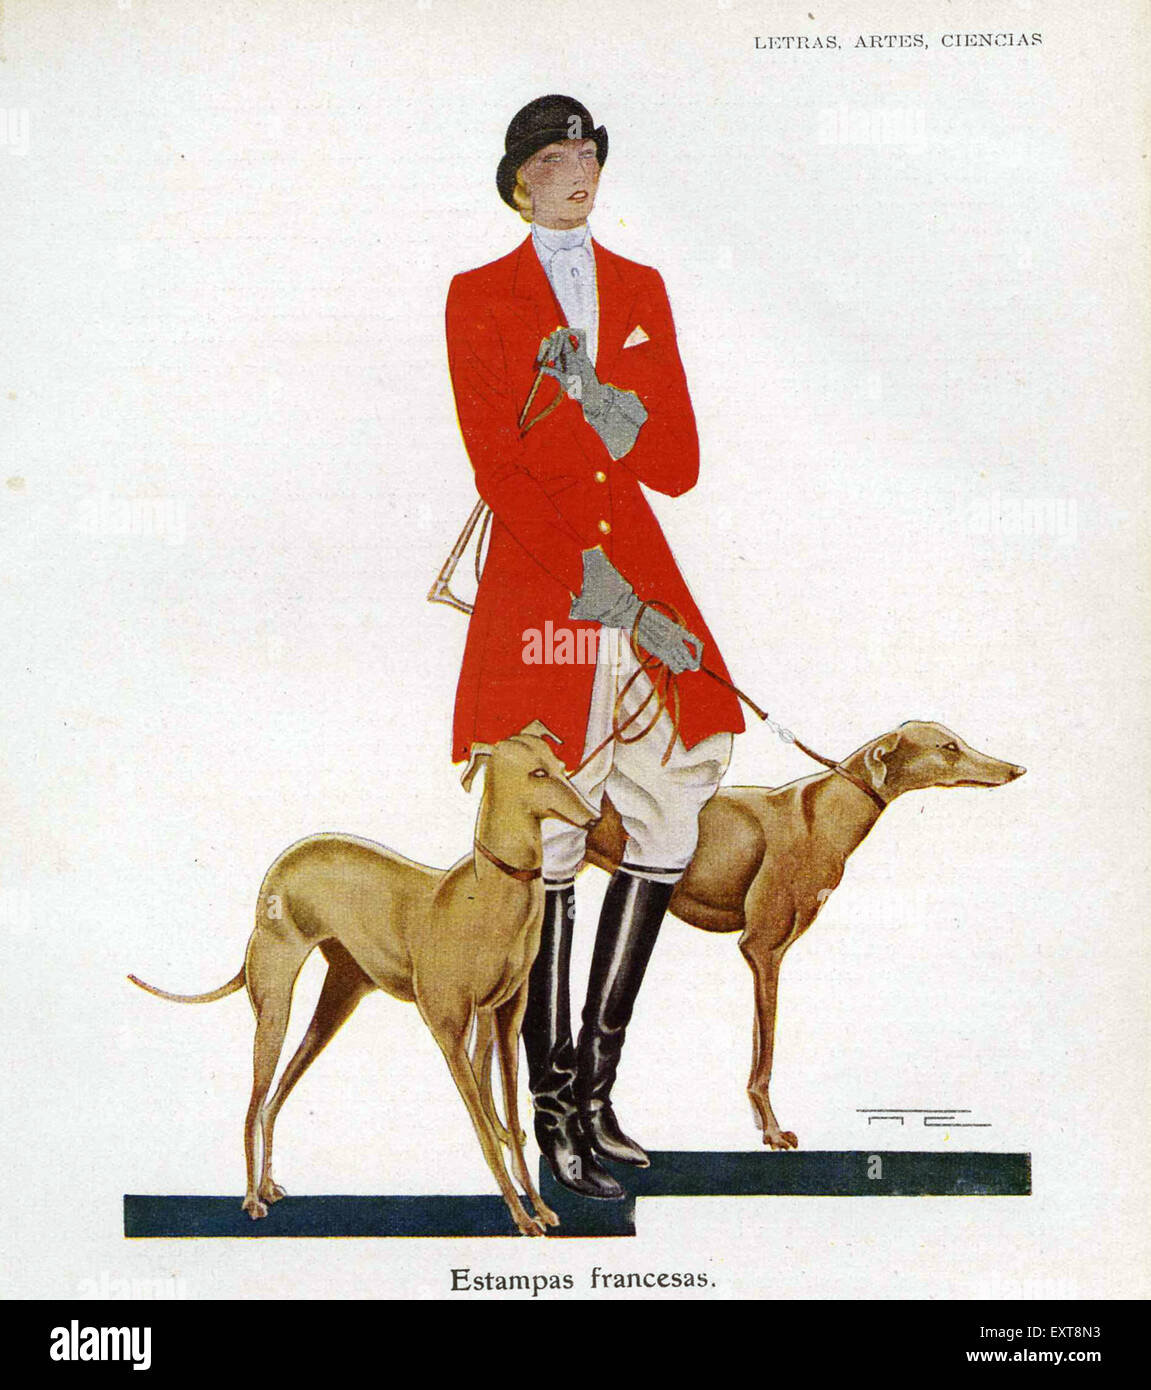 1920s Spain Woman in Hunting outfit with hounds Magazine Plate Stock Photo